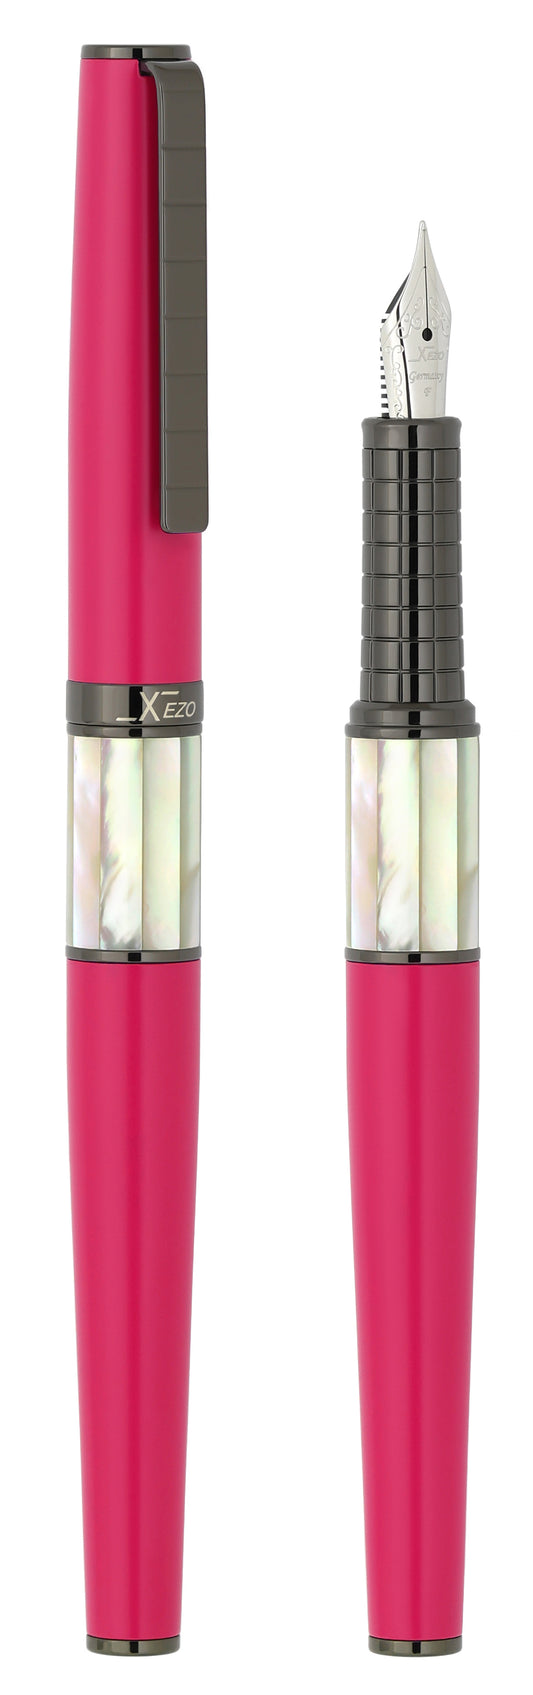 Xezo - Vertical view of two Speed Master Cerise F-WGM Fountain pens; the one on the left is capped, and the one on the right is uncapped